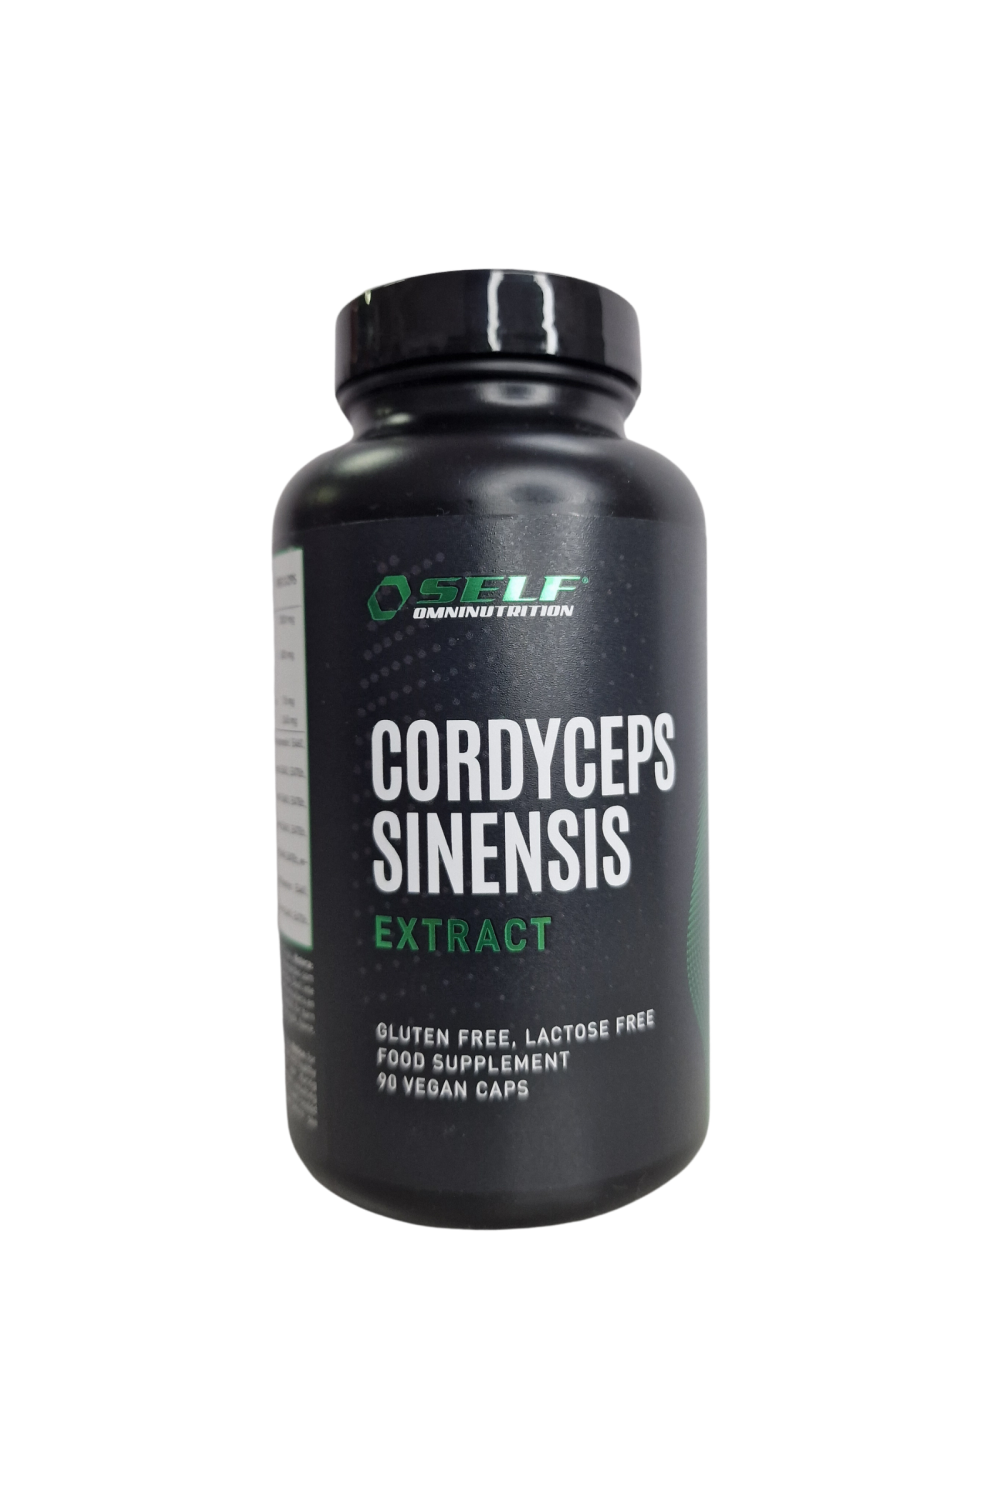 self omninutrition cordyceps sinensis extract 90 cps